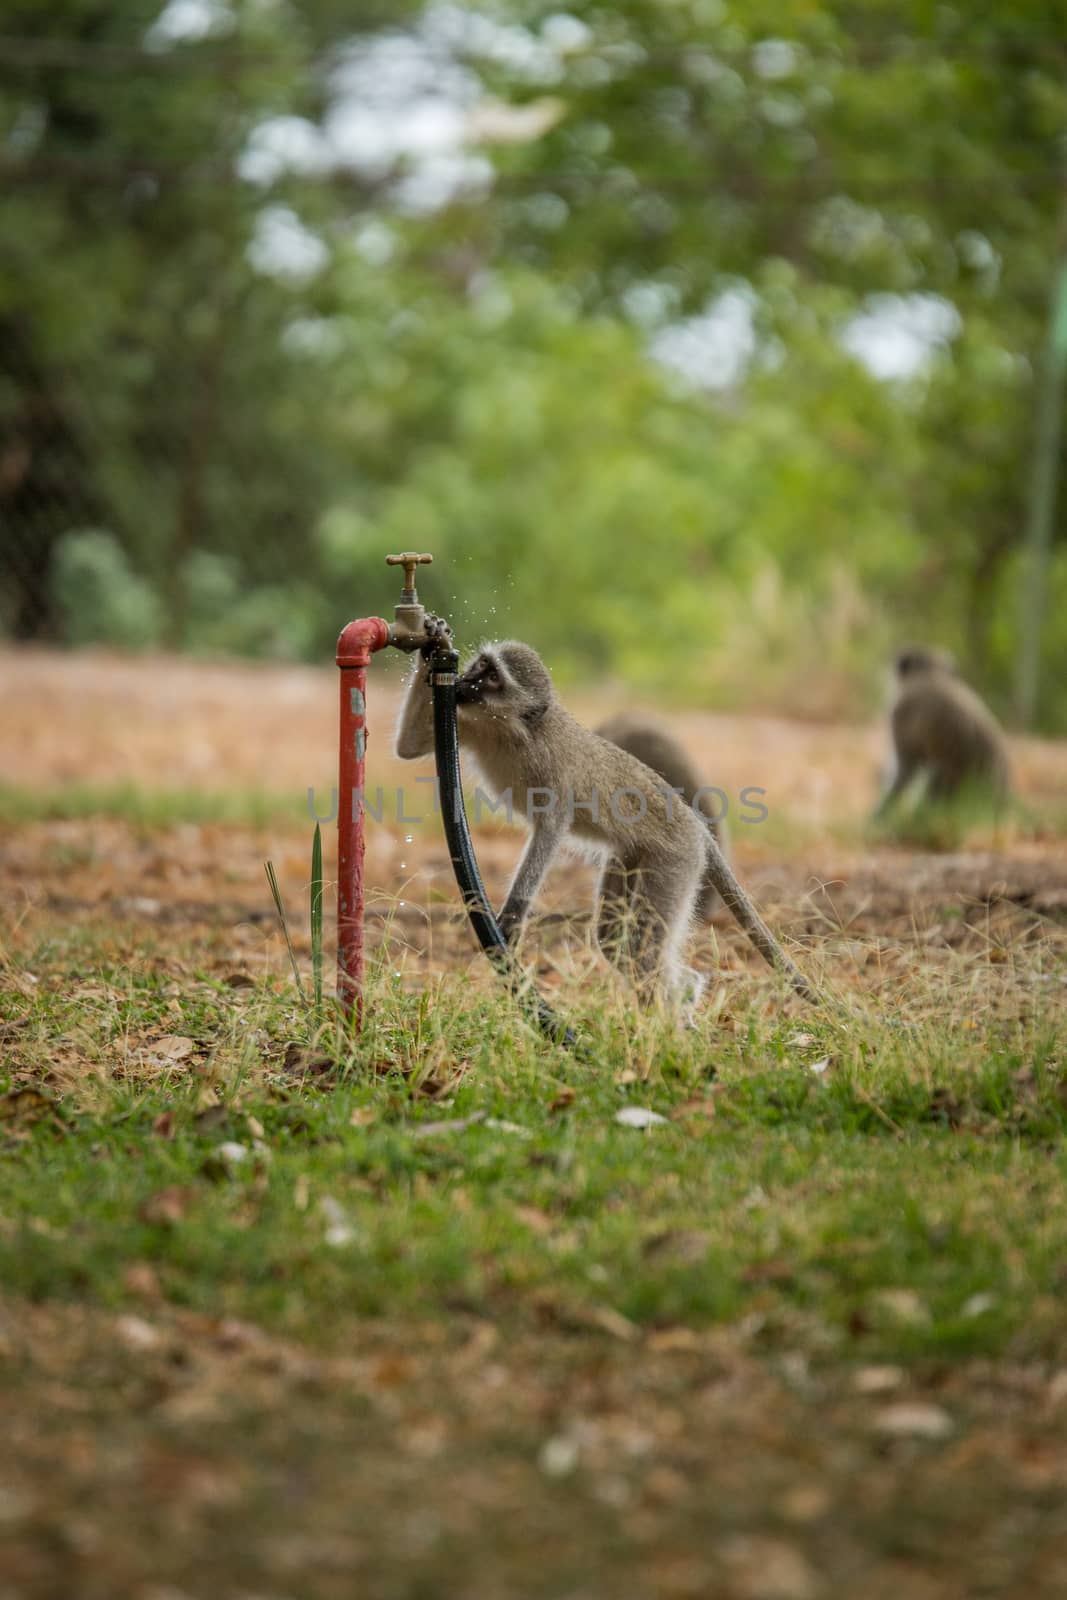 Vervet monkey drinking from the tap in the Kruger National Park, South Africa.